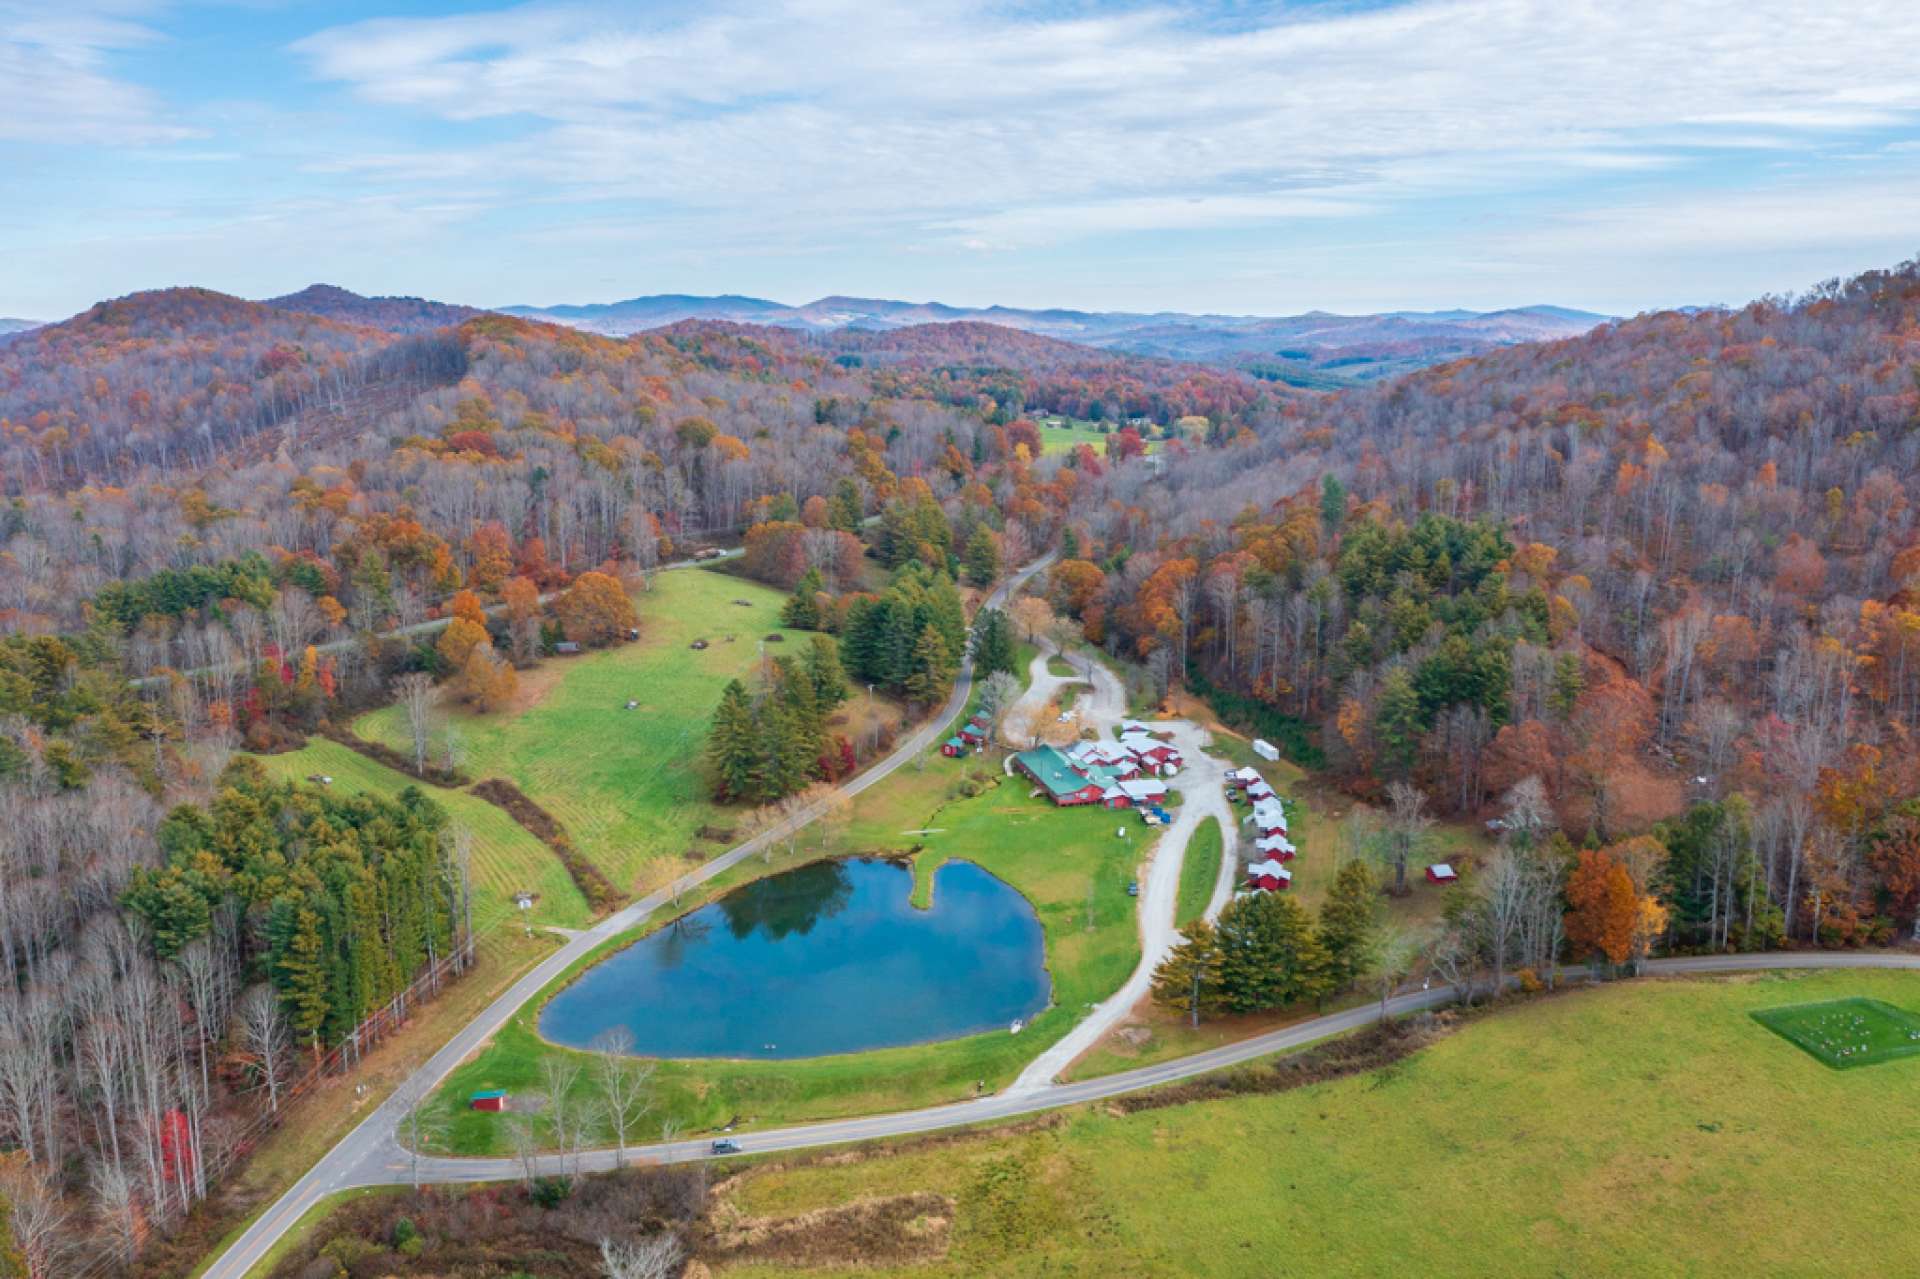 Aerial view of Shatley Springs Restaurant, pond, and cabins. Located in the Crumpler area of Ashe County, Shatley Springs is a popular destination for visitors to the NC High Country.